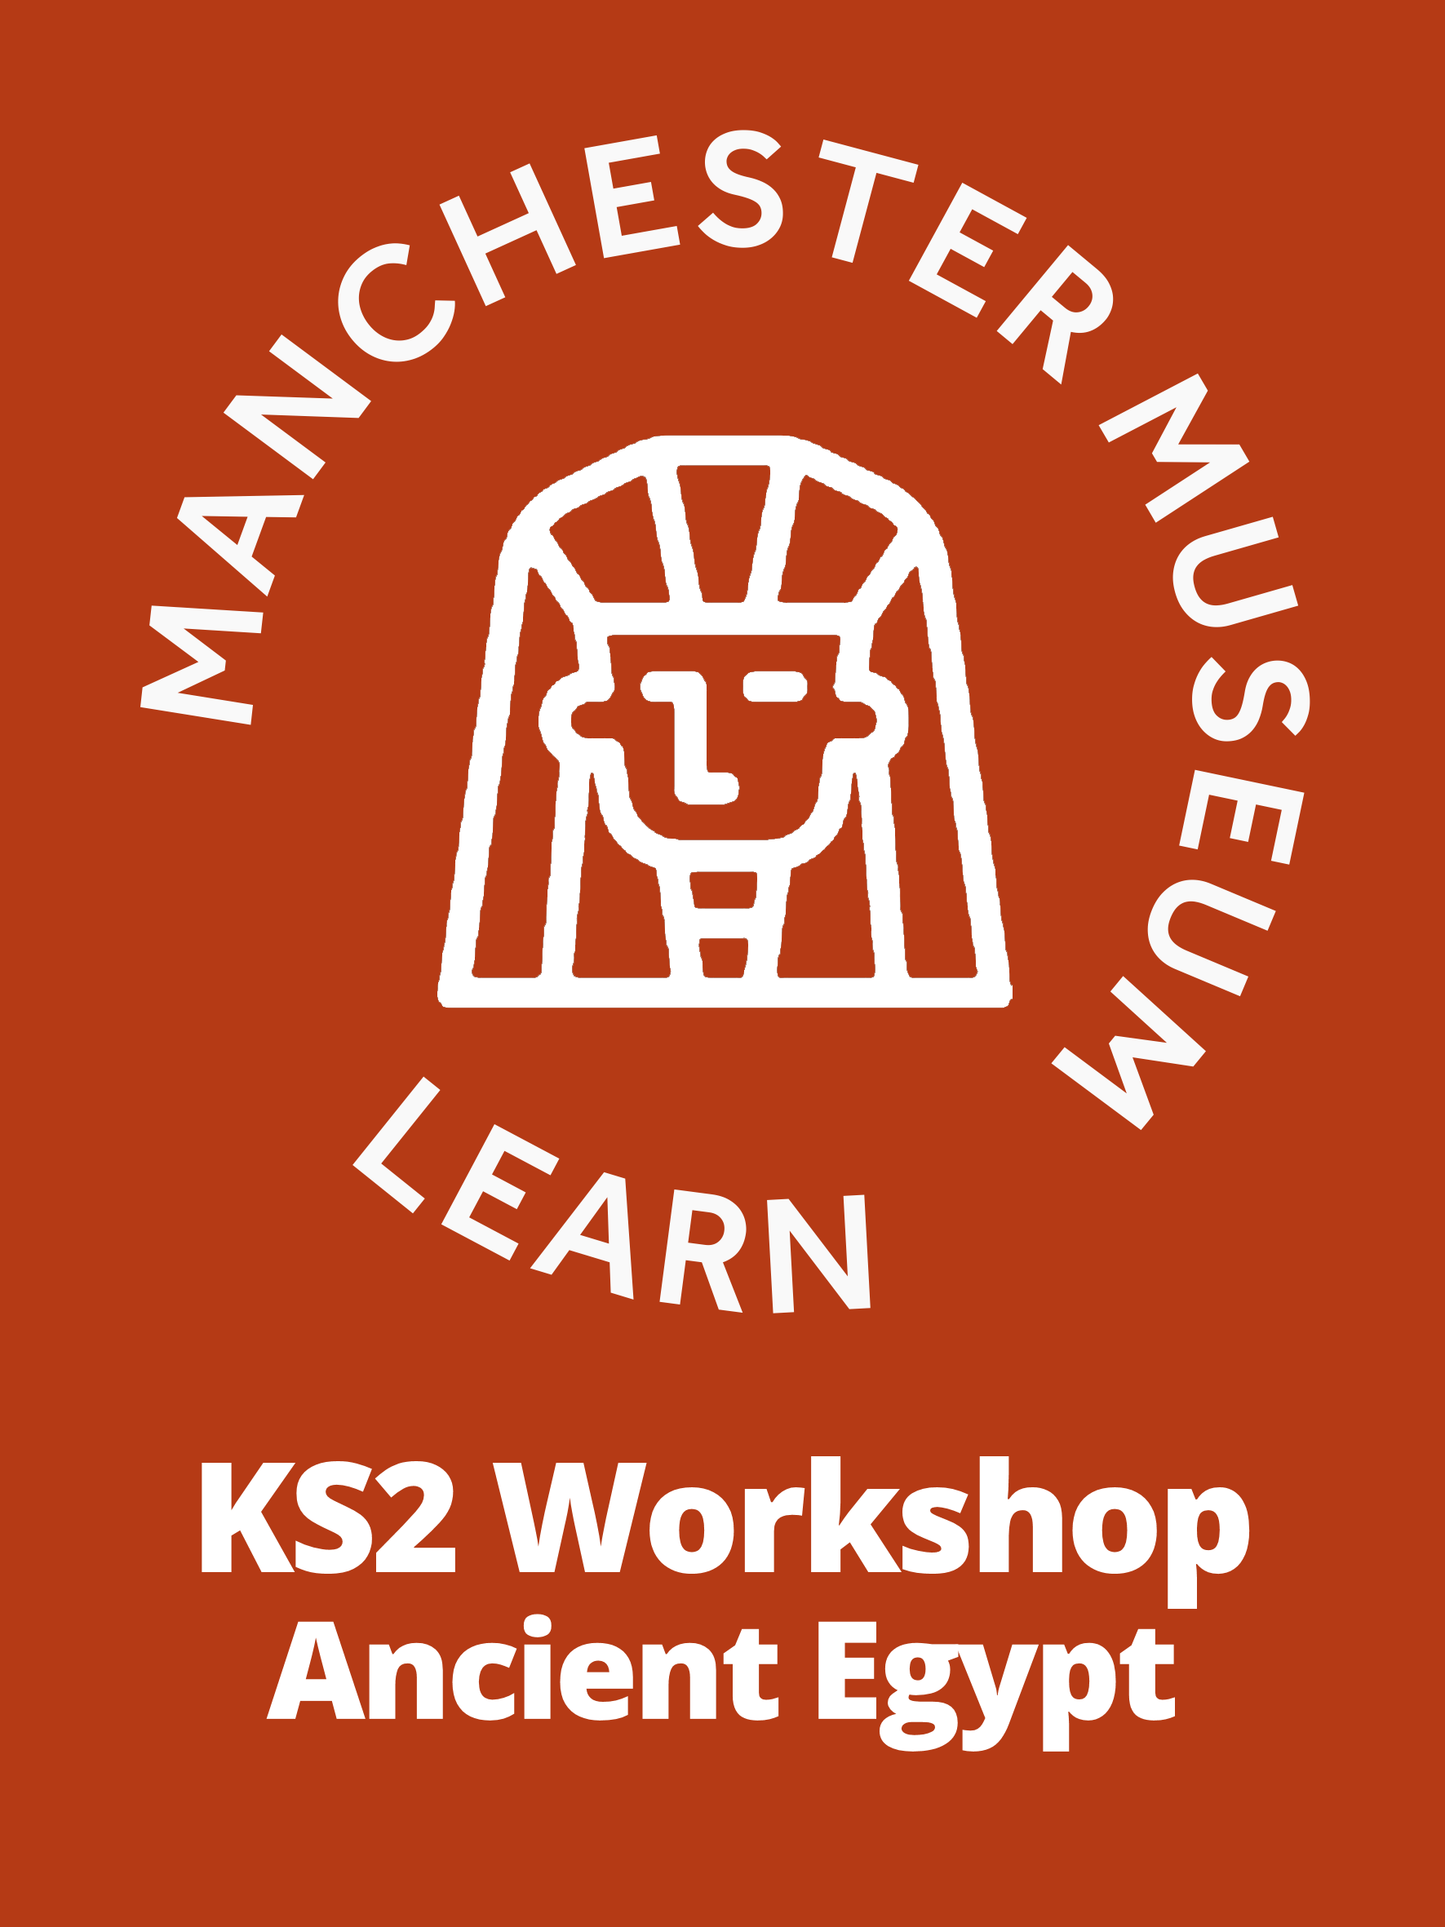 Ancient Egypt workshop with full day visit: September - March